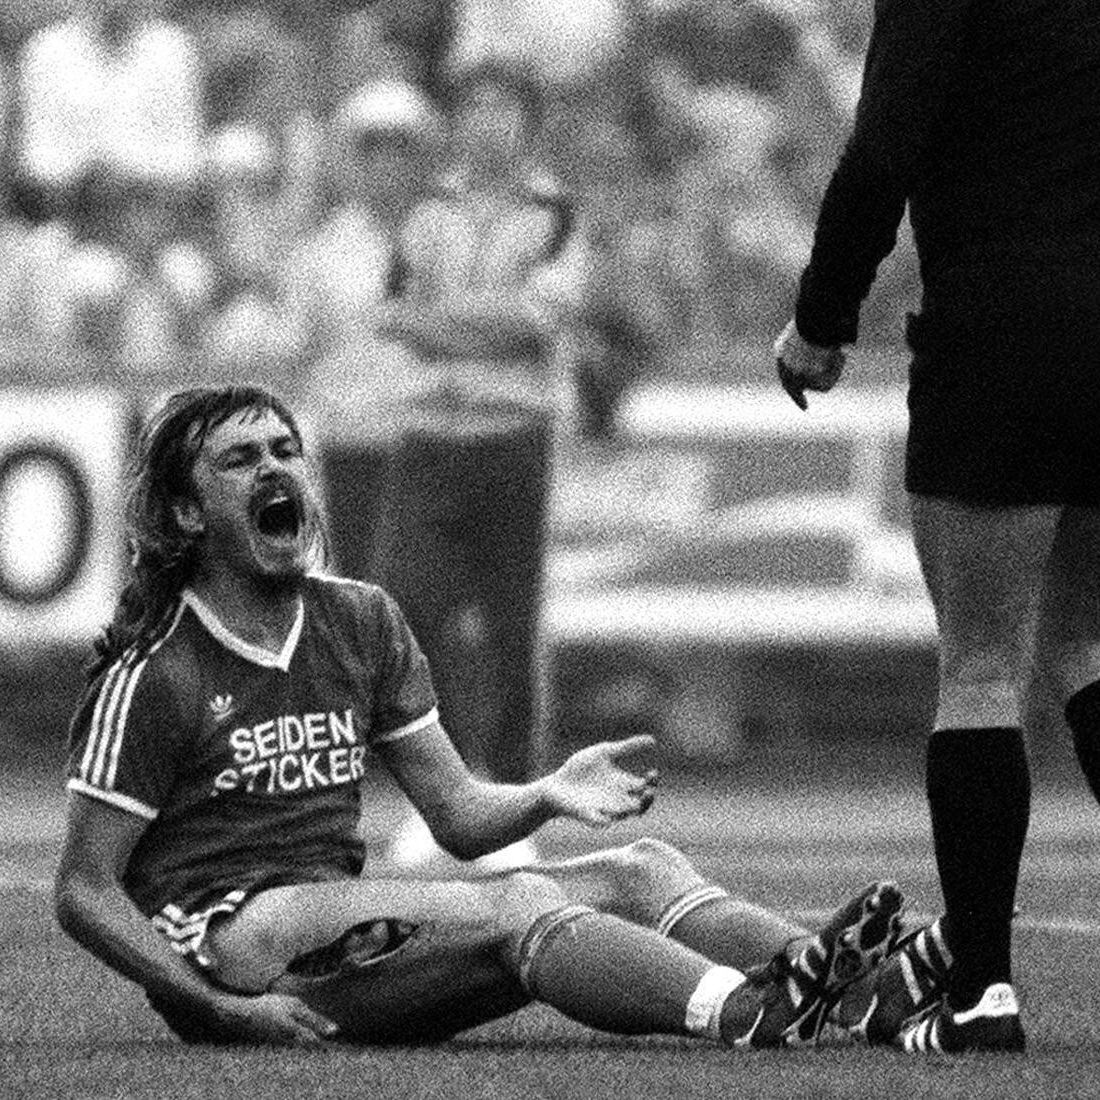 Another story is that one time our player Ewald Lienen was tackled so brutally his thigh got cut down to the bone. He wasn't too happy and threw some fists around. Our club did the only sensible thing – and commemorated this injury with *checks notes* a sock. As you do.27/x